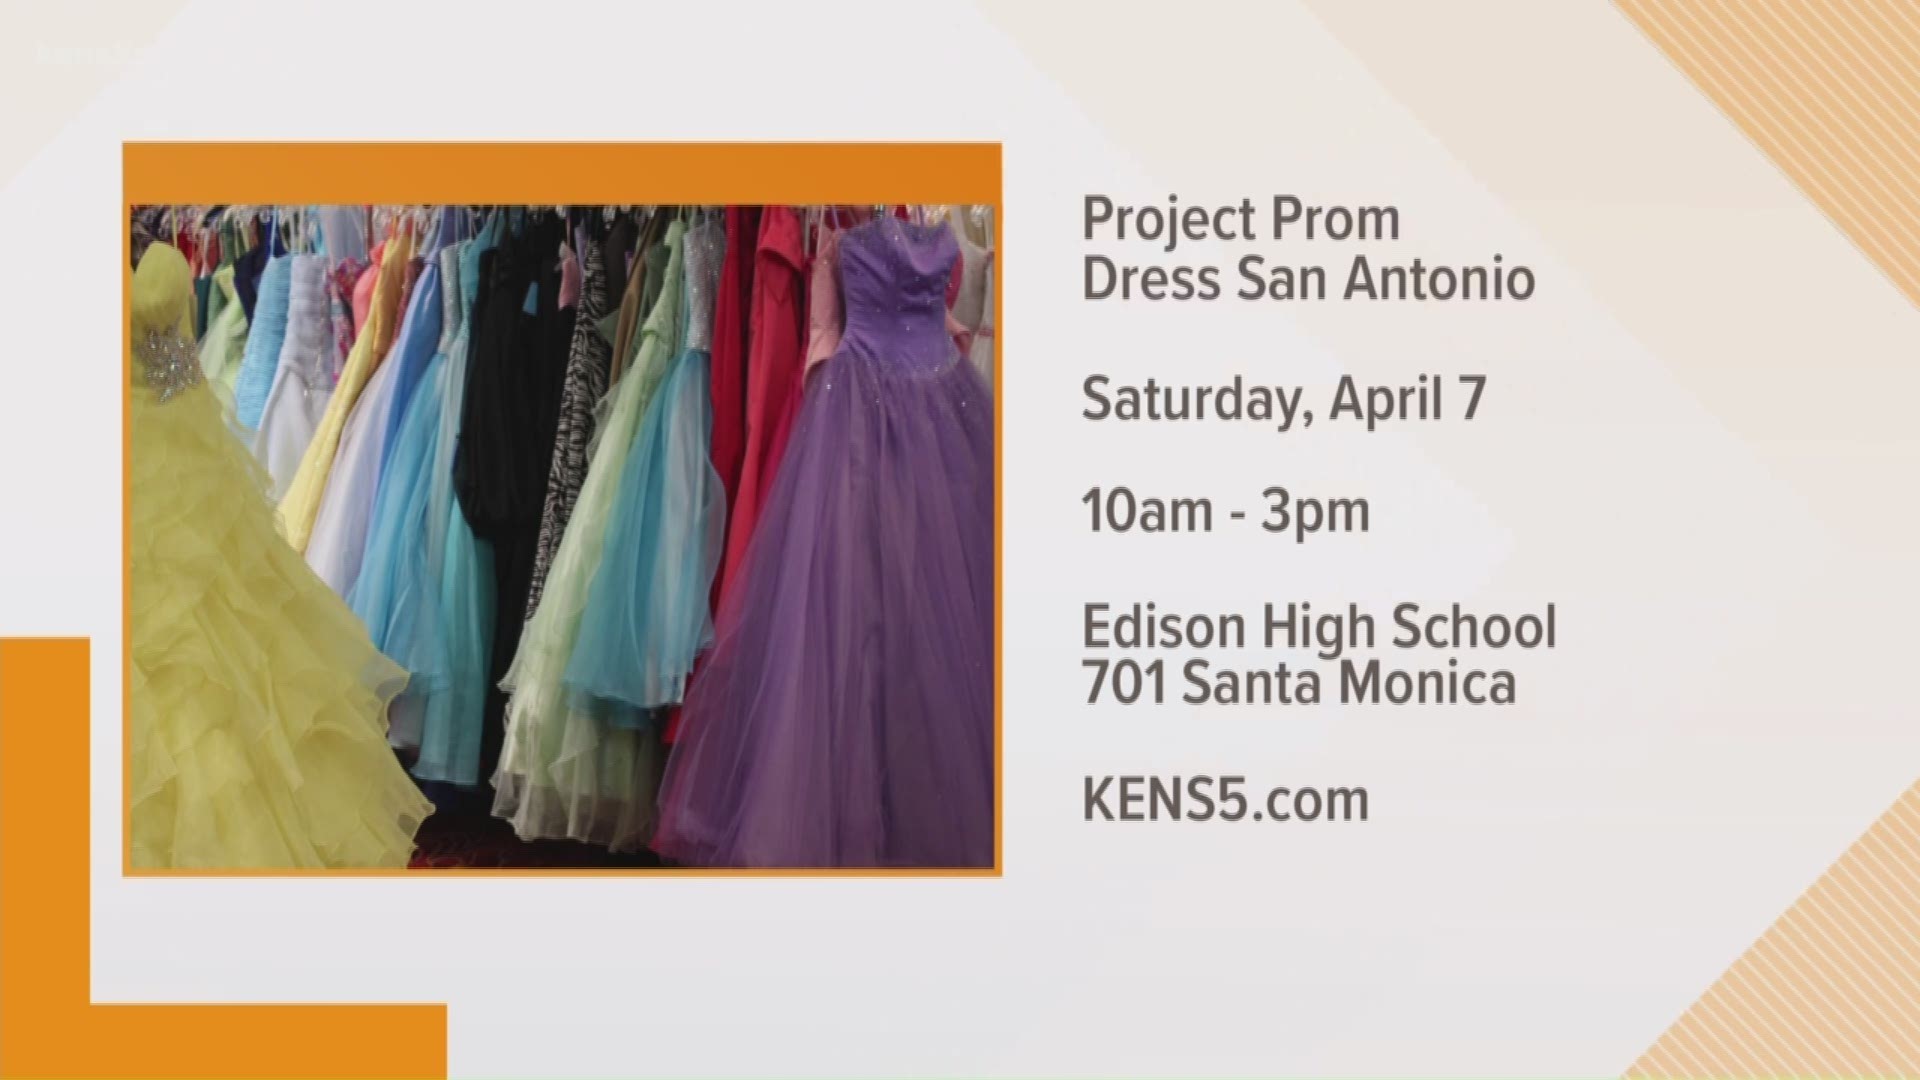 The non-profit is hosting an event on Saturday, 4/7 at Edison High School from 10 am to 3 pm.